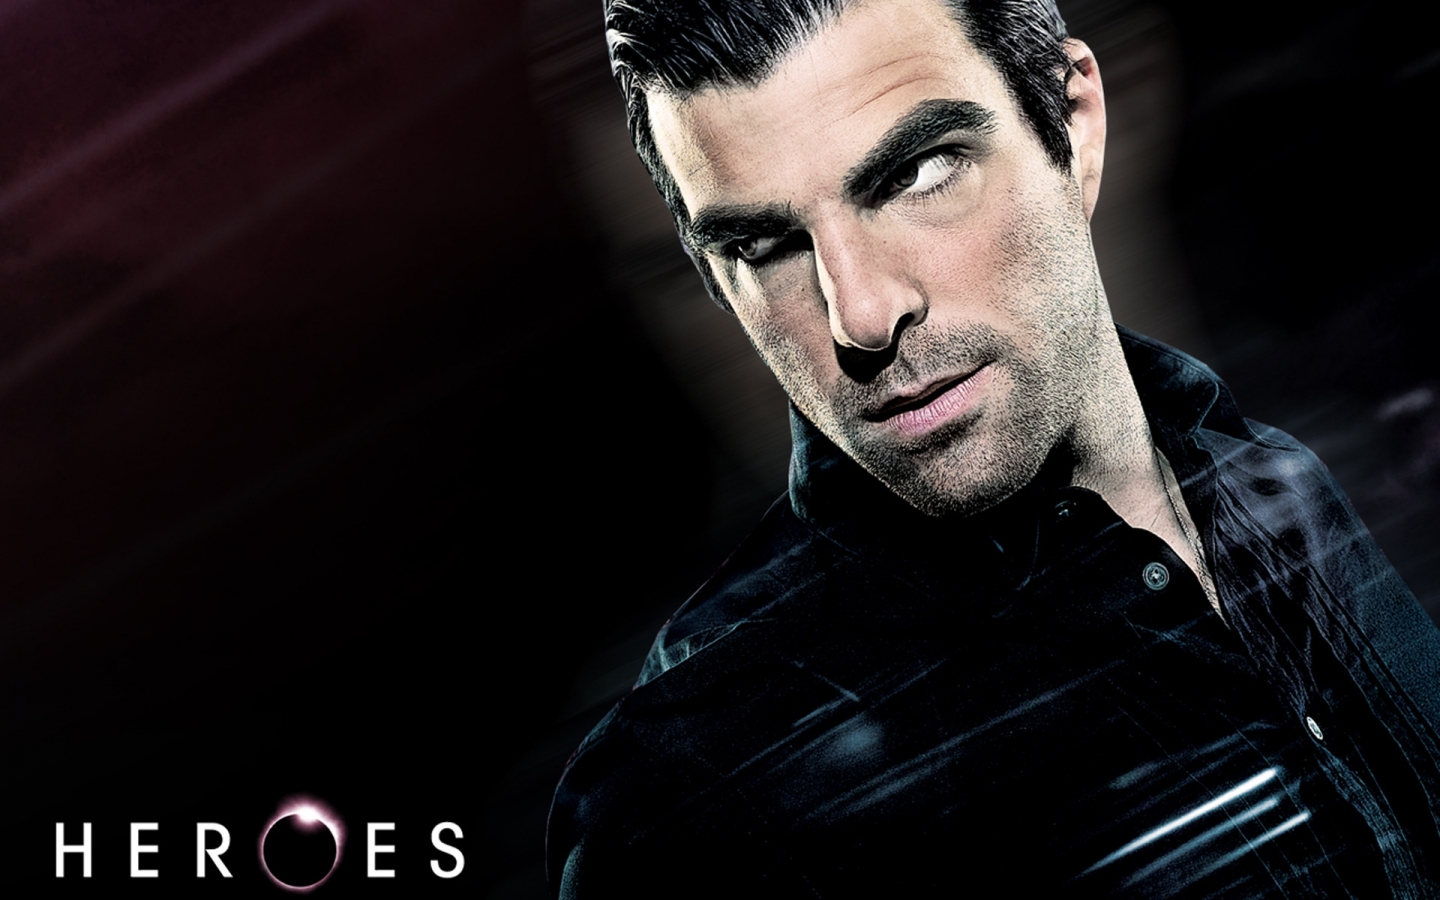 Heroes Sylar for 1440 x 900 widescreen resolution